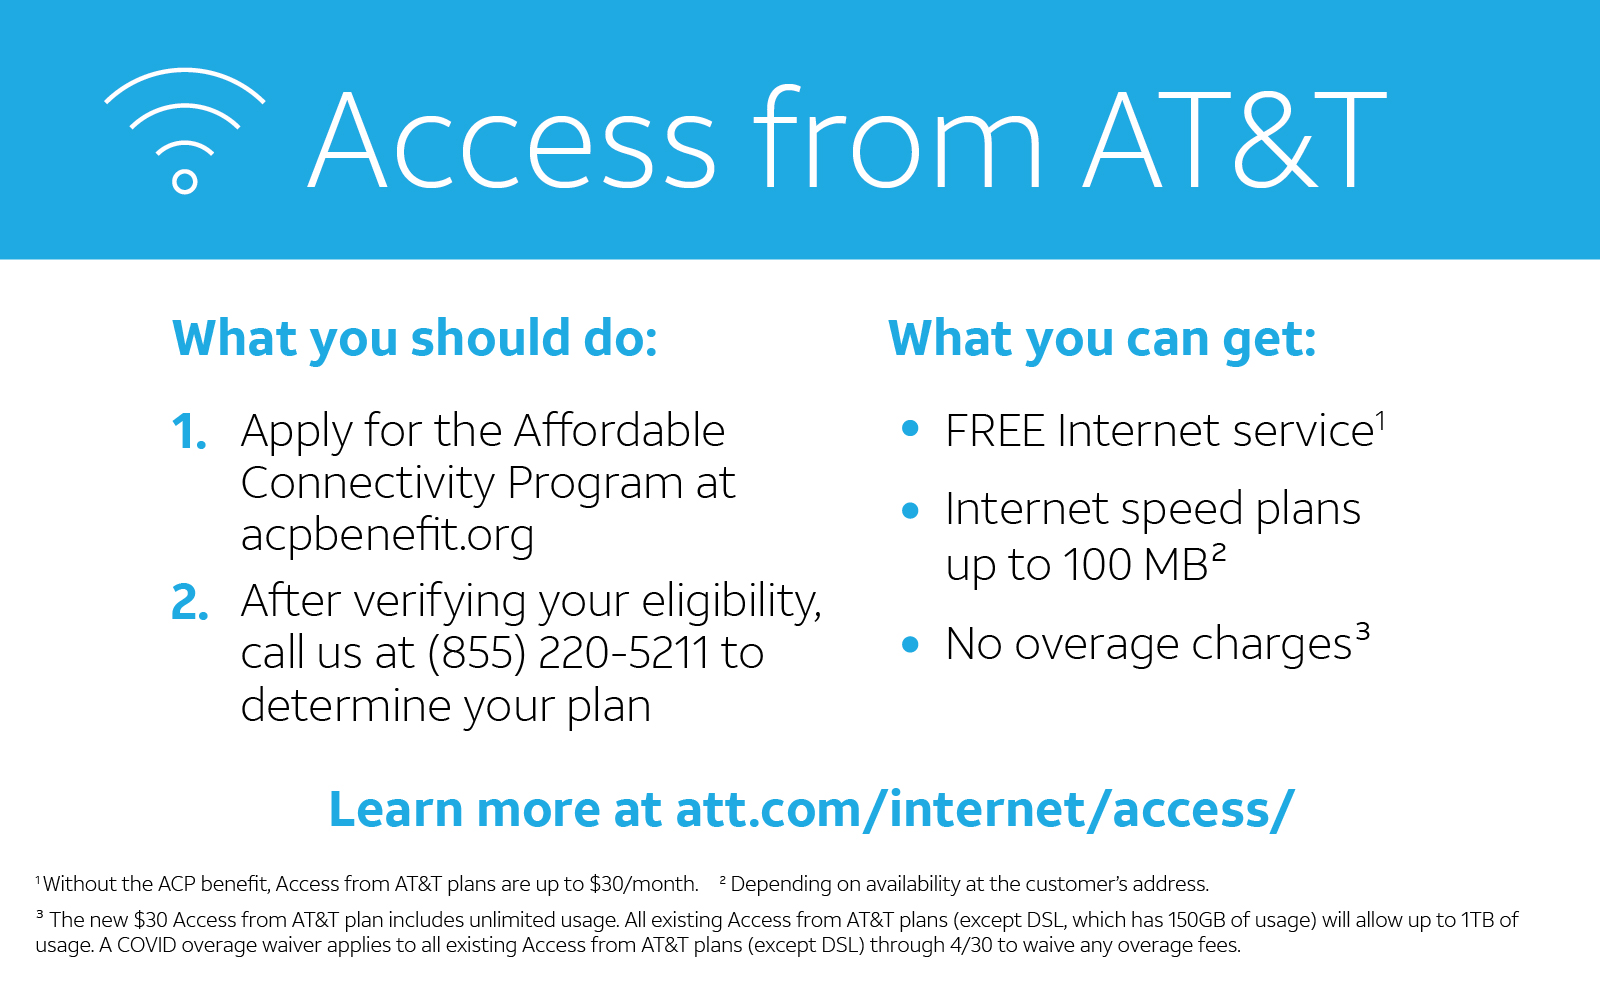 New AT&T Access Plan + New Federal Benefit = Free